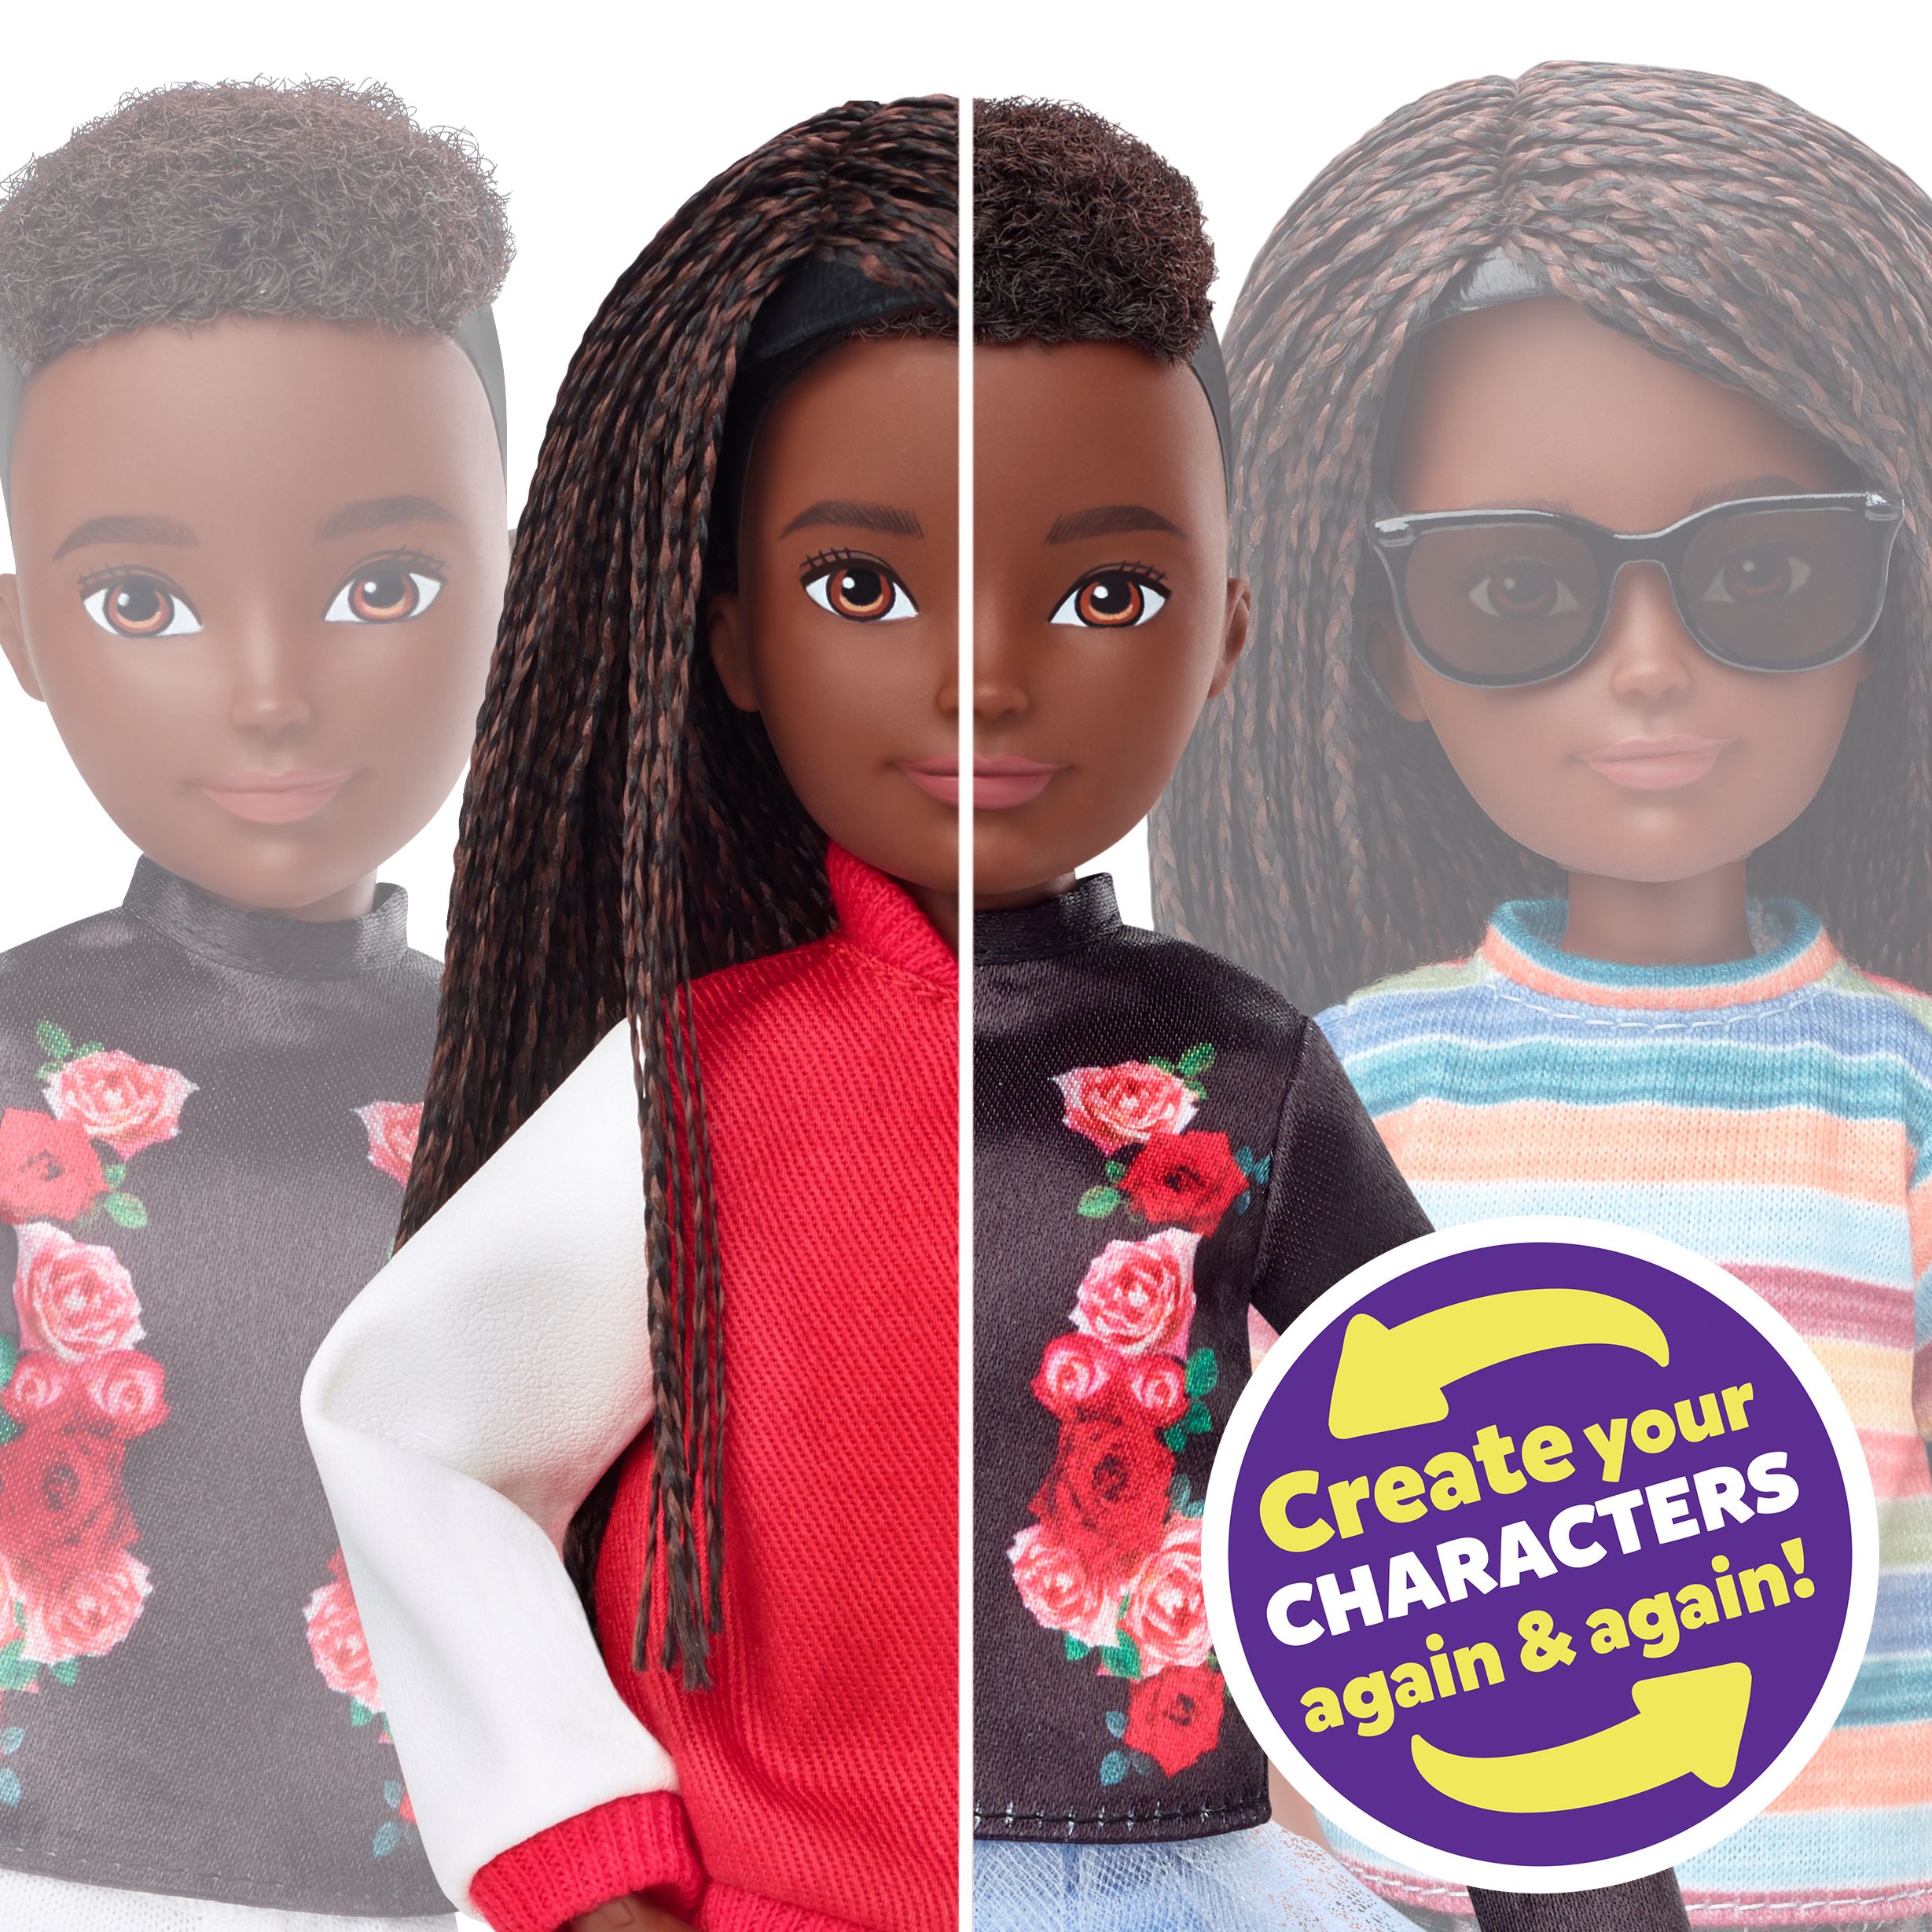 Creatable World Deluxe Character Kit Customizable Doll, Black Braided Hair - image 5 of 7